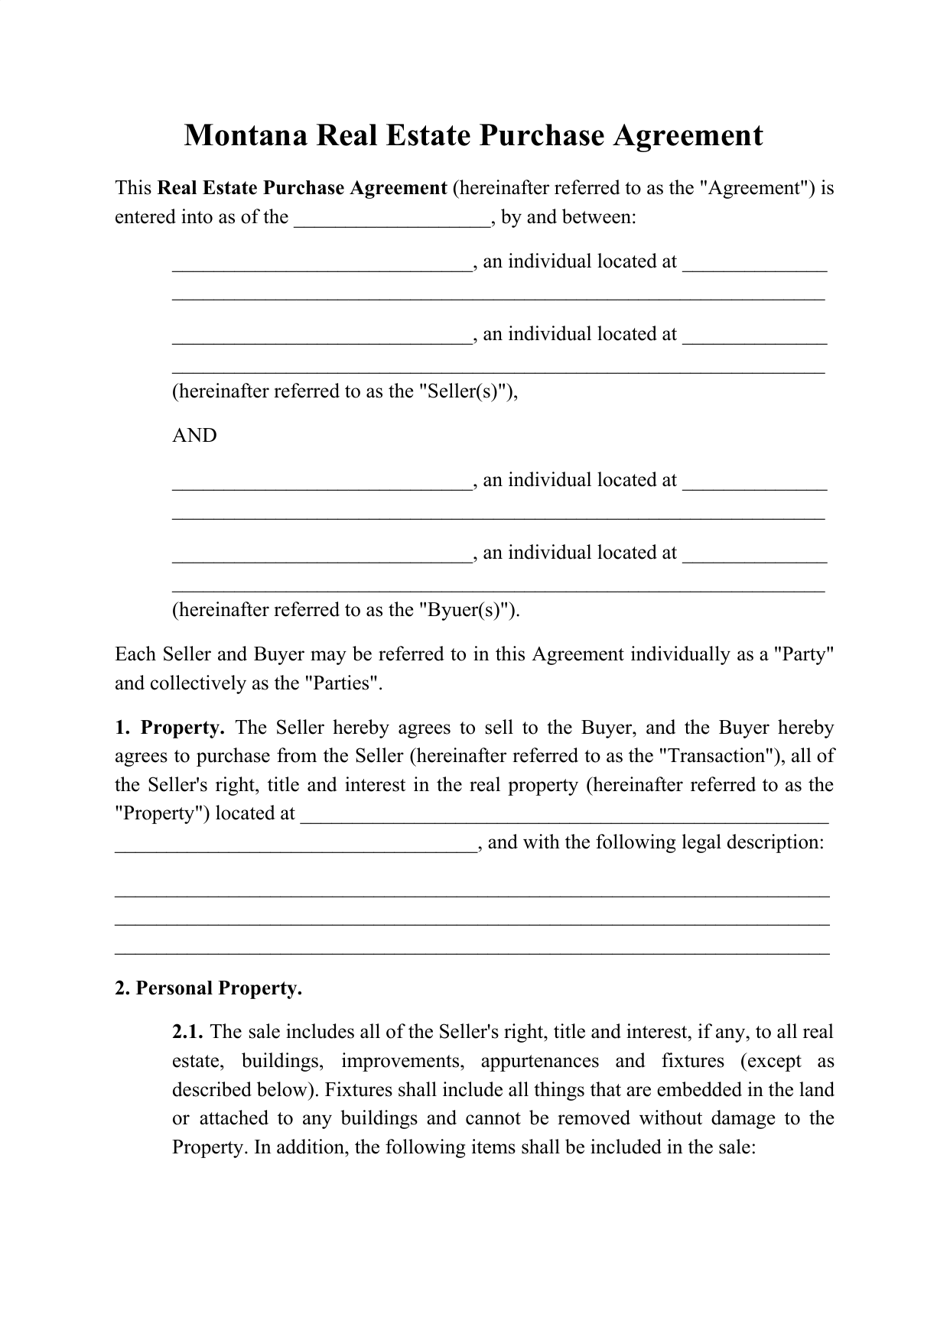 montana-real-estate-purchase-agreement-template-fill-out-sign-online-and-download-pdf